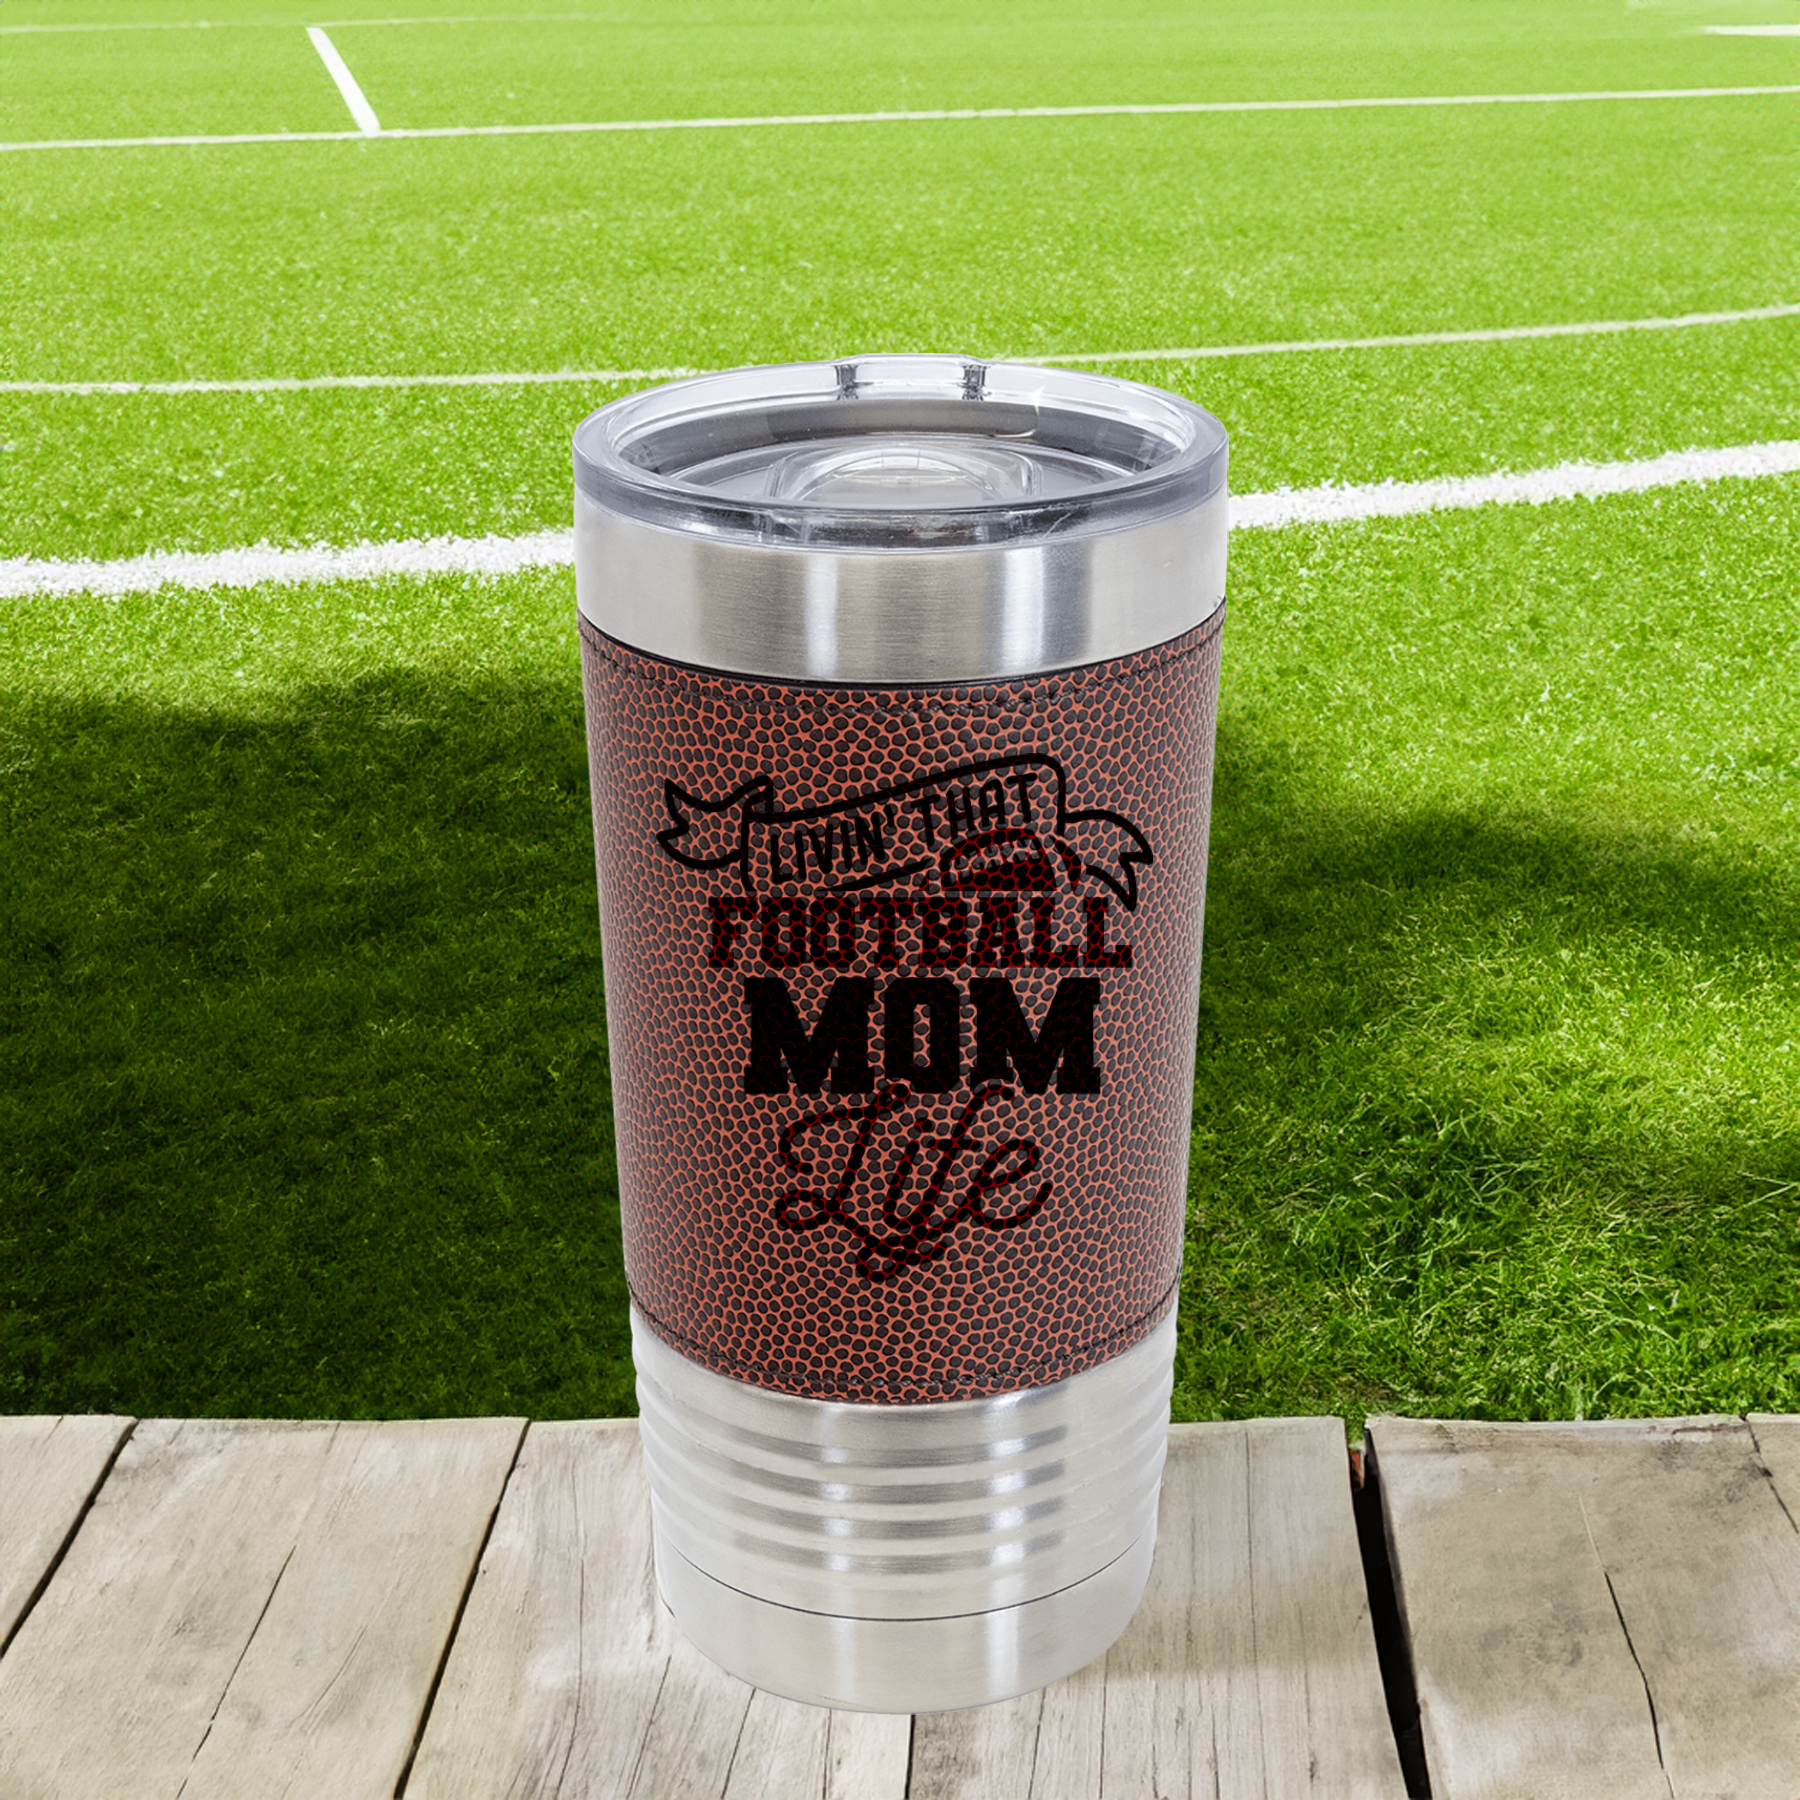 The Daily Grind Of A Football Mom Football Tumbler